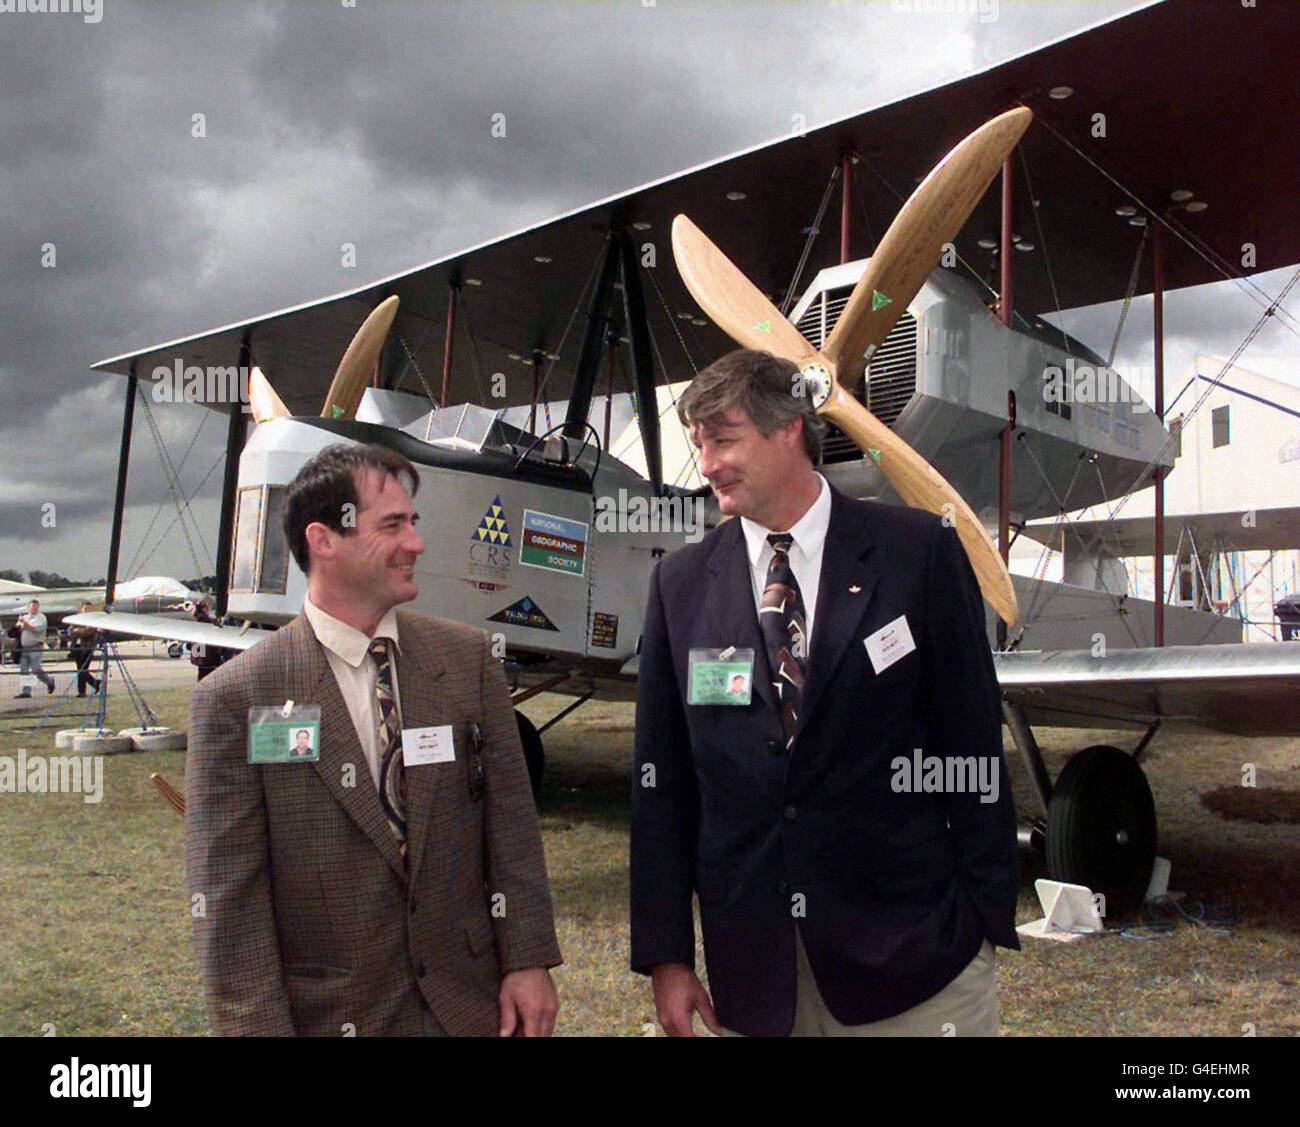 Pilots John LaNoue, left, and Mark Rebholz with the replica version of a Vickers Vimy bomber plane, which is set to re-enact an historic Britain to South Africa flight. The Vimy, called the Silver Queen, has been put through its paces at the Farnborough Air Show. It will leave Brooklands airfield in Surrey to fly 8,500 miles across the Alps, the Apennines, the Greek Isles, the pyramids, the upper Nile, Mt Kilimanjaro and Victoria Falls to South Africa. The flight re-enacts where possible the original 1920 route taken by South African pilots Pierre van Ryneveld and Christopher Quinton Brand Stock Photo